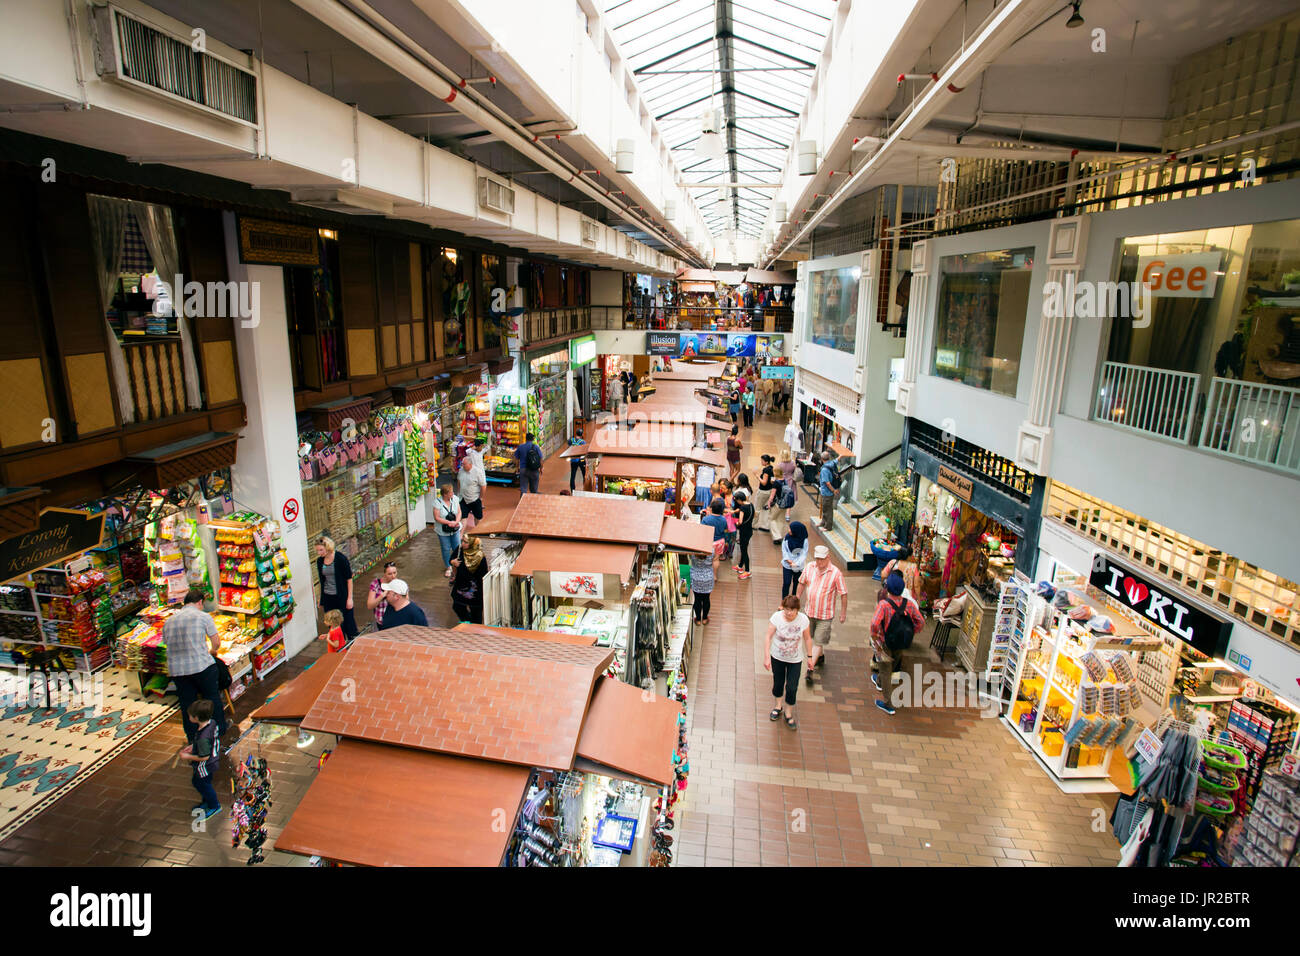 Kuala Lumpur, Malaysia - January 26, 2017: Located in the heart of Kuala Lumpur, Malaysia Central Market is a cultural heritage site with restored art Stock Photo